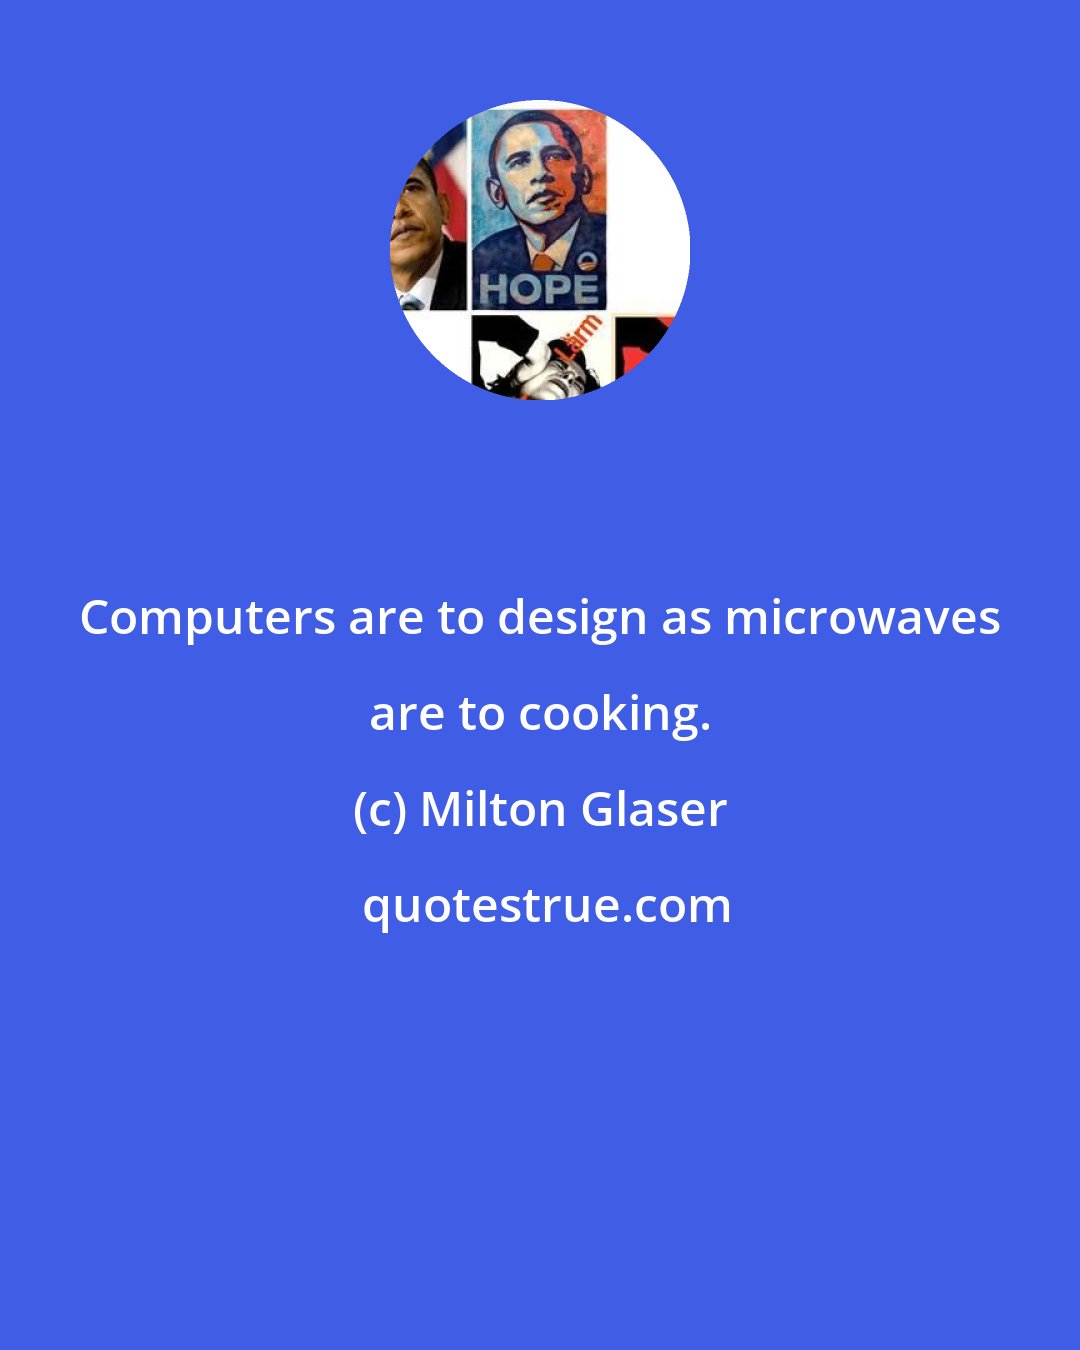 Milton Glaser: Computers are to design as microwaves are to cooking.